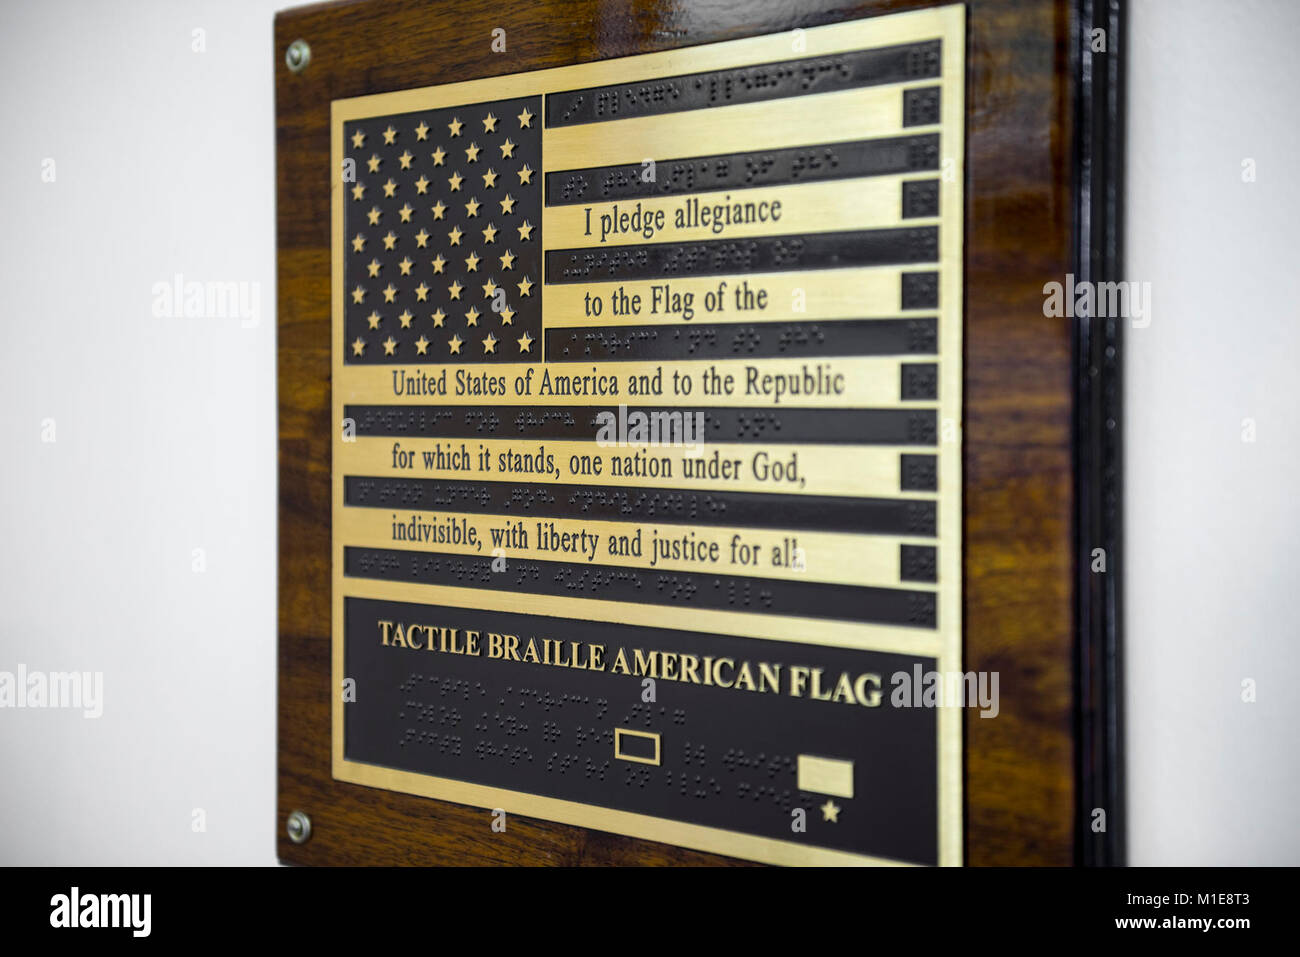 The American Braille tactile flag in the Welcome Center at Arlington National Cemetery, Arlington, Virginia, Jan. 26, 2018.  In 2008, the 110th Congress passed H.R. 4169, which authorized the placement of the Braille Flag at ANC in honor of blind members of the Armed Forces, veterans, and other Americans.  The Braille Flag can be found inside the ANC Welcome Center near the Arlington Tours ticket center.  (U.S. Army Stock Photo